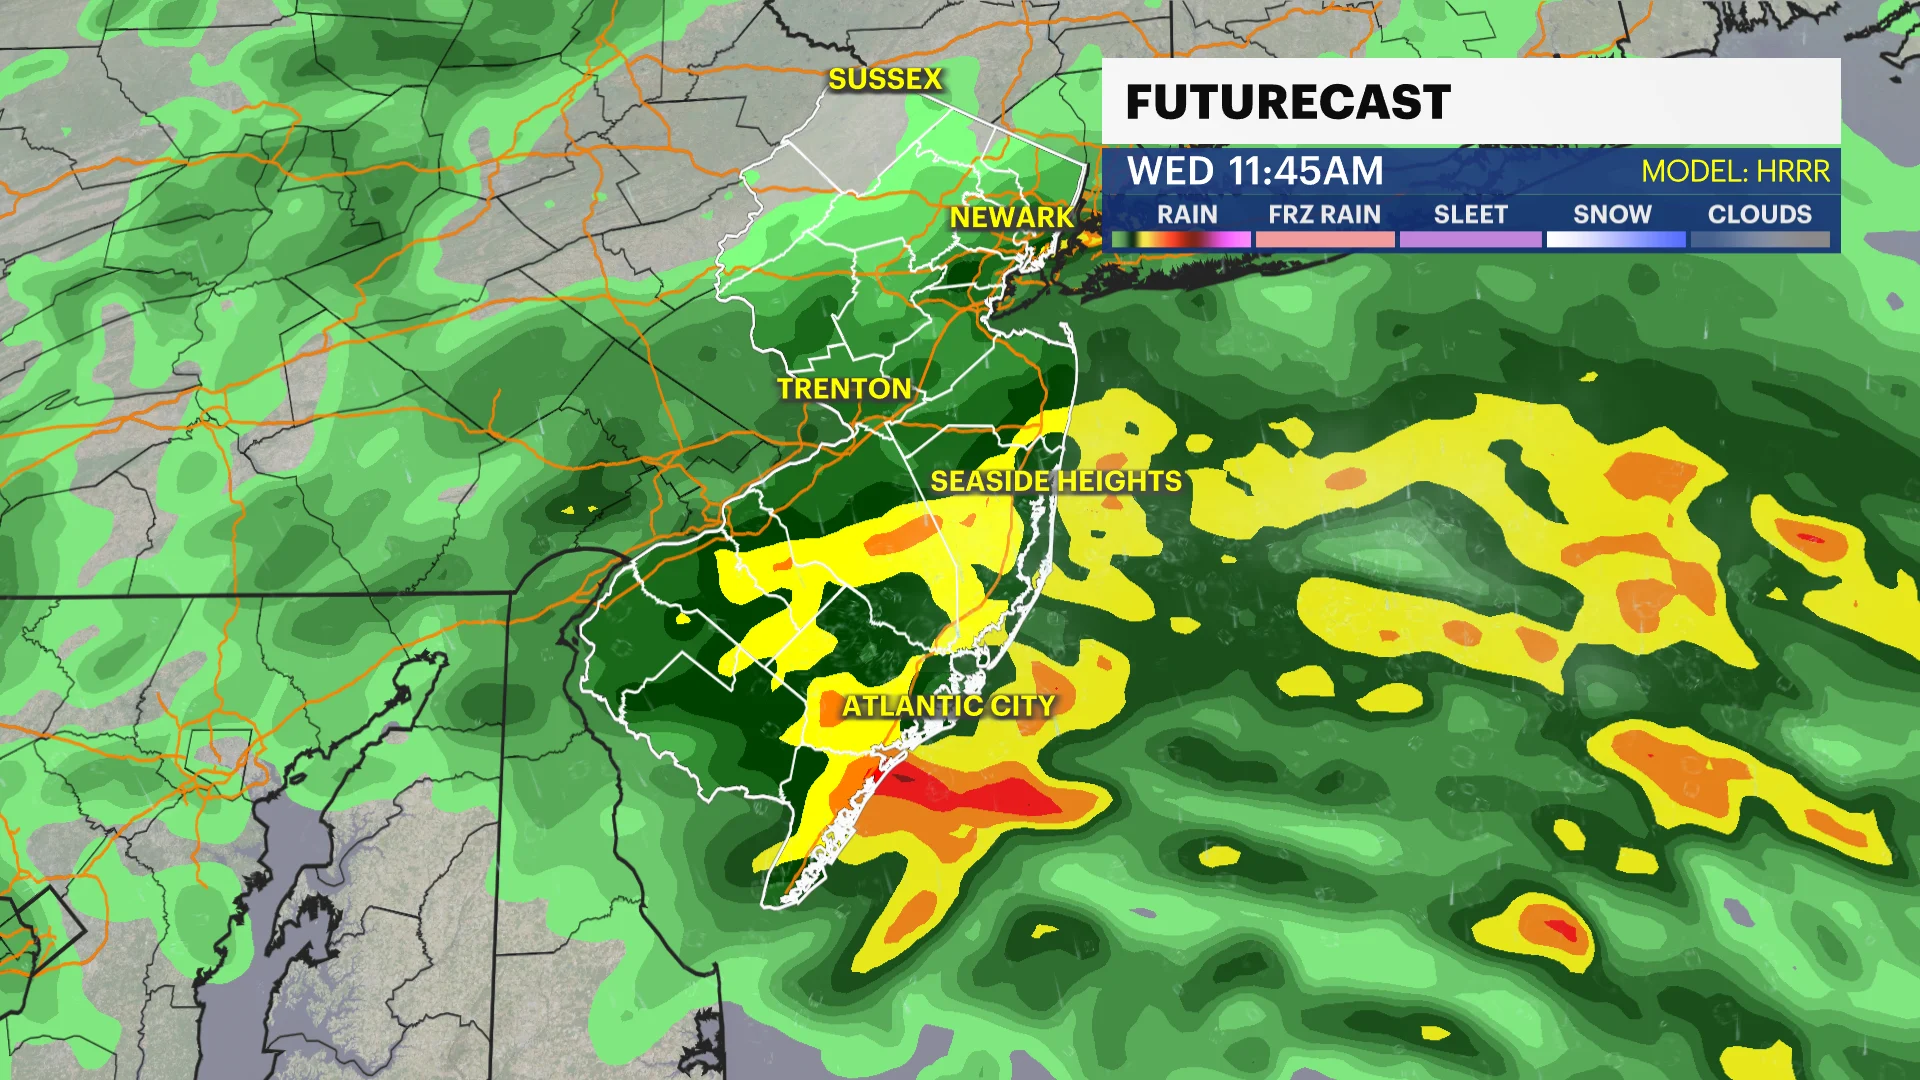 STORM WATCH: Periods of rain today will create puddles and slick travel in New Jersey